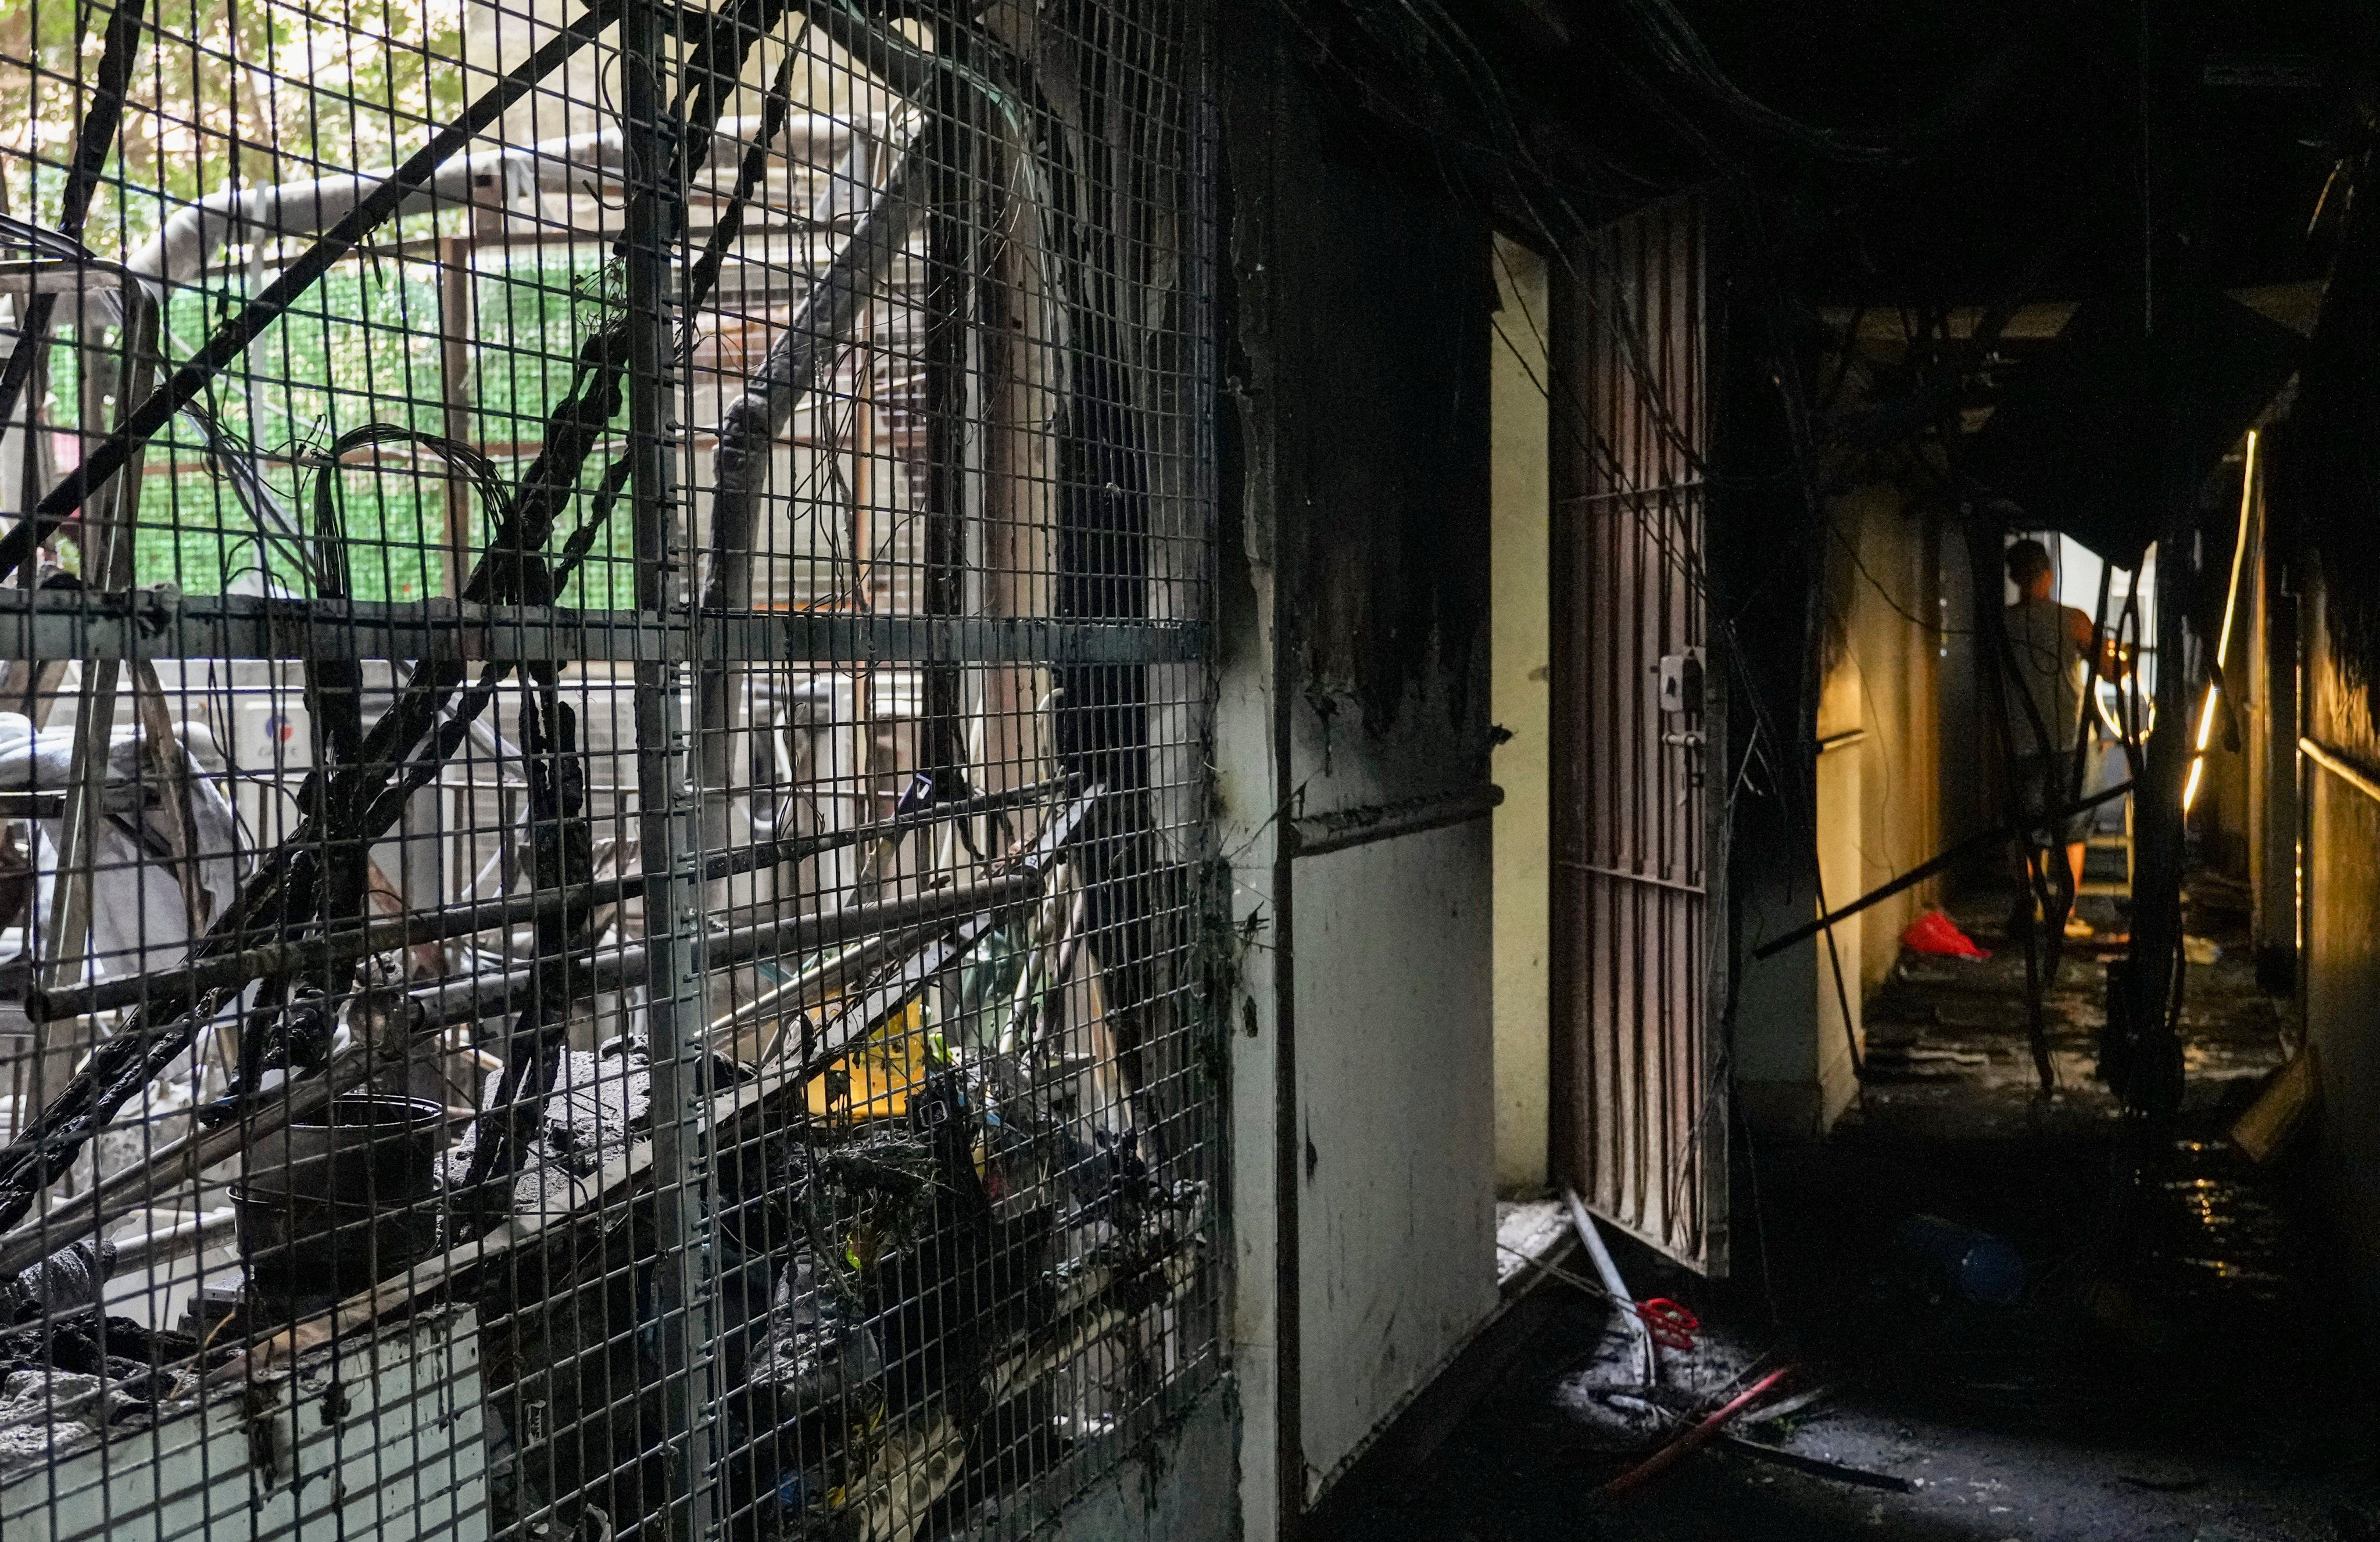 The corridors of New Lucky House are littered with debris. Photo: May Tse